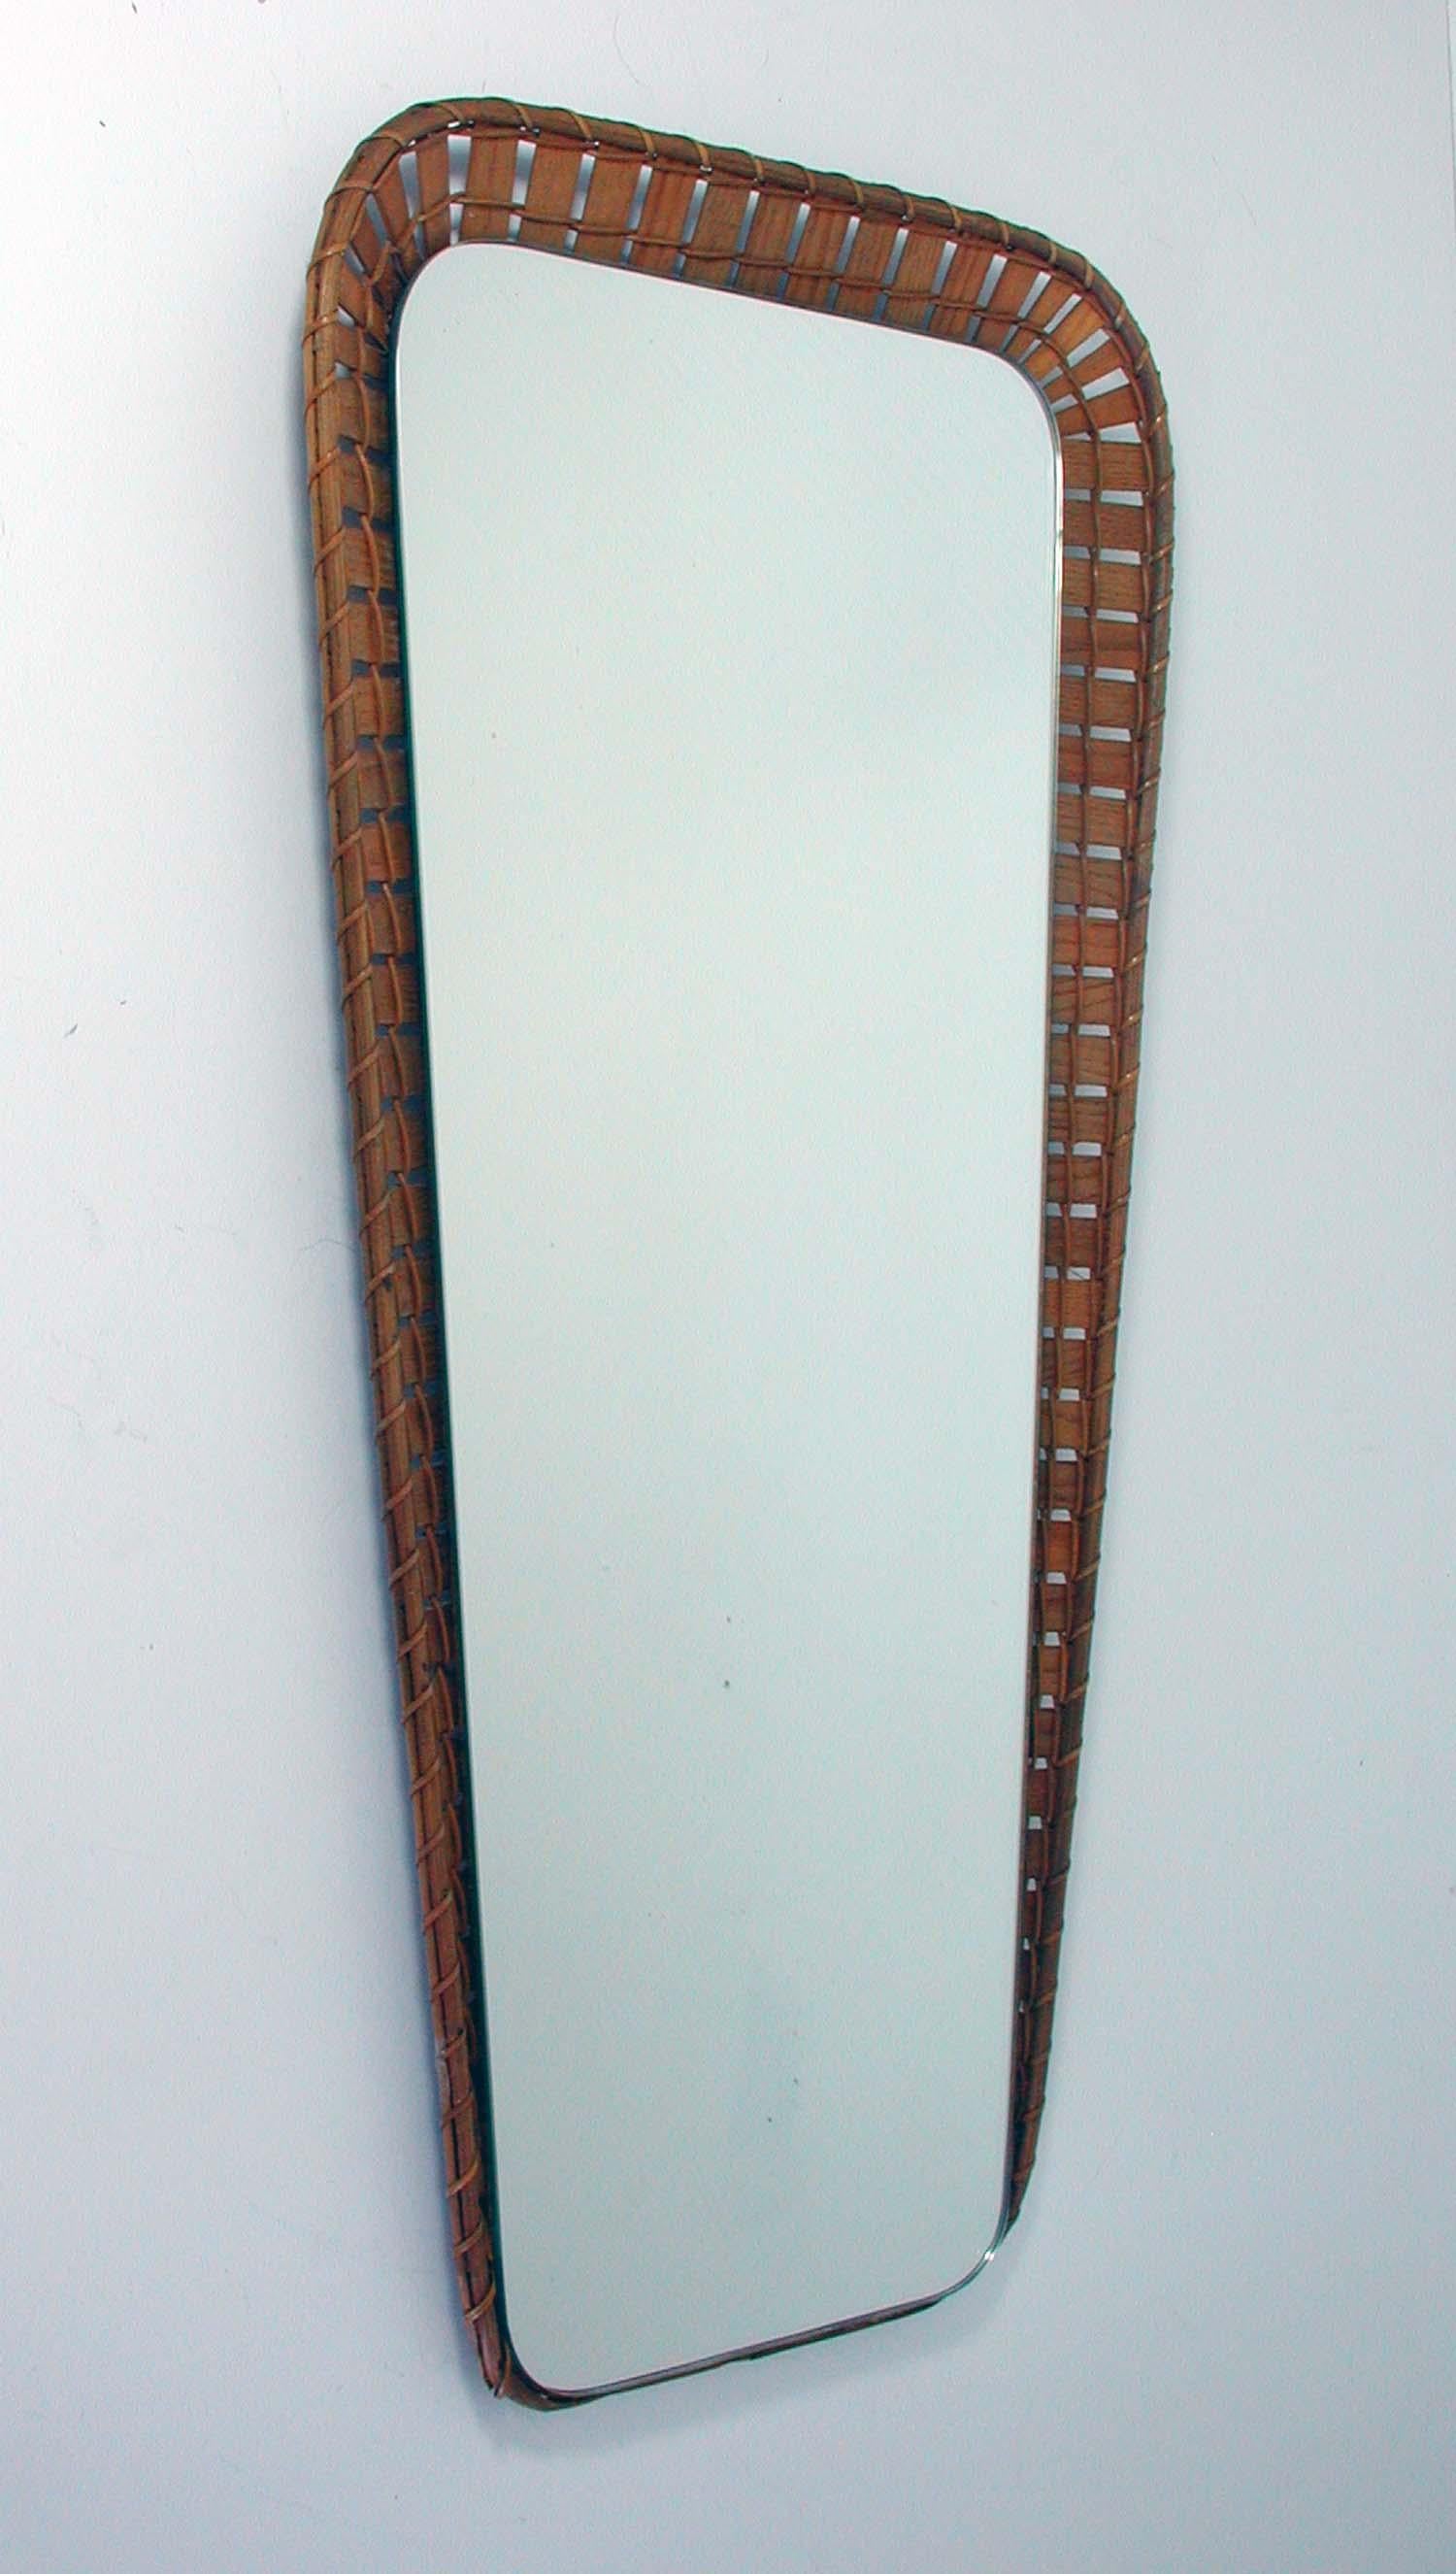 This elegant wall mirror was designed and manufactured in Sweden in the 1950s. It has got a conical rattan frame and is in very good condition with only minor signs of use.